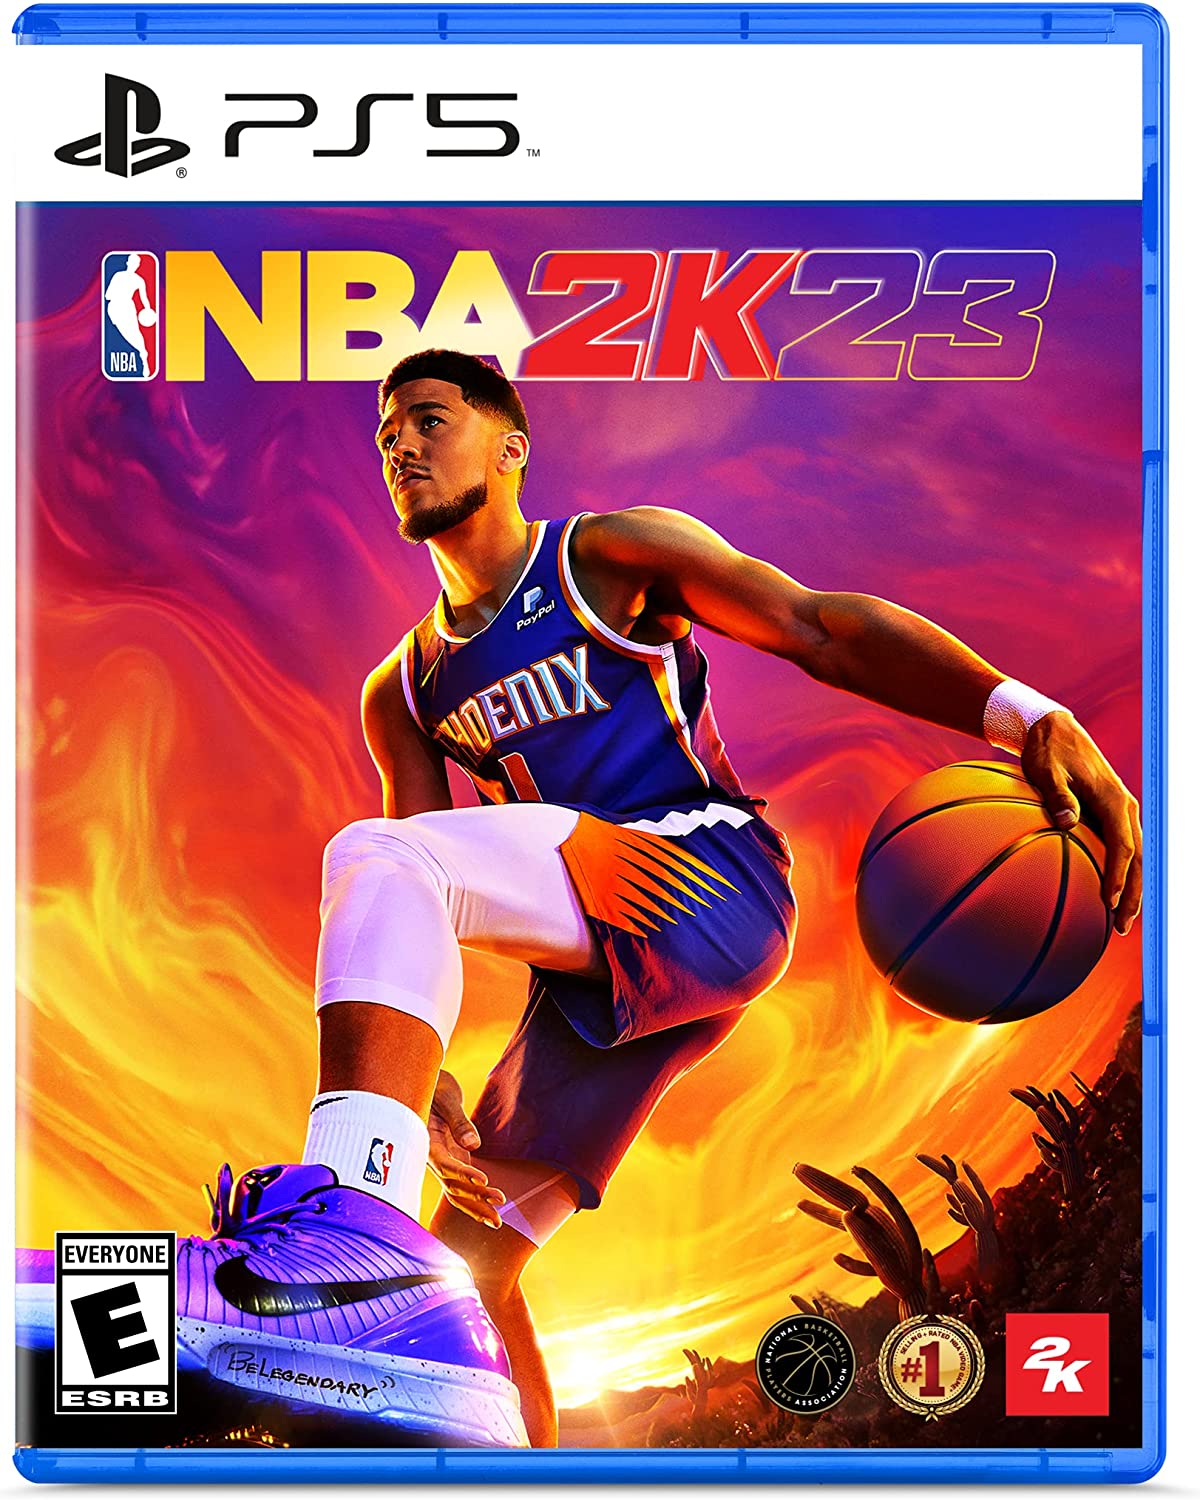 nba 2k23 for playstation 5, one of the best gifts for teen boys